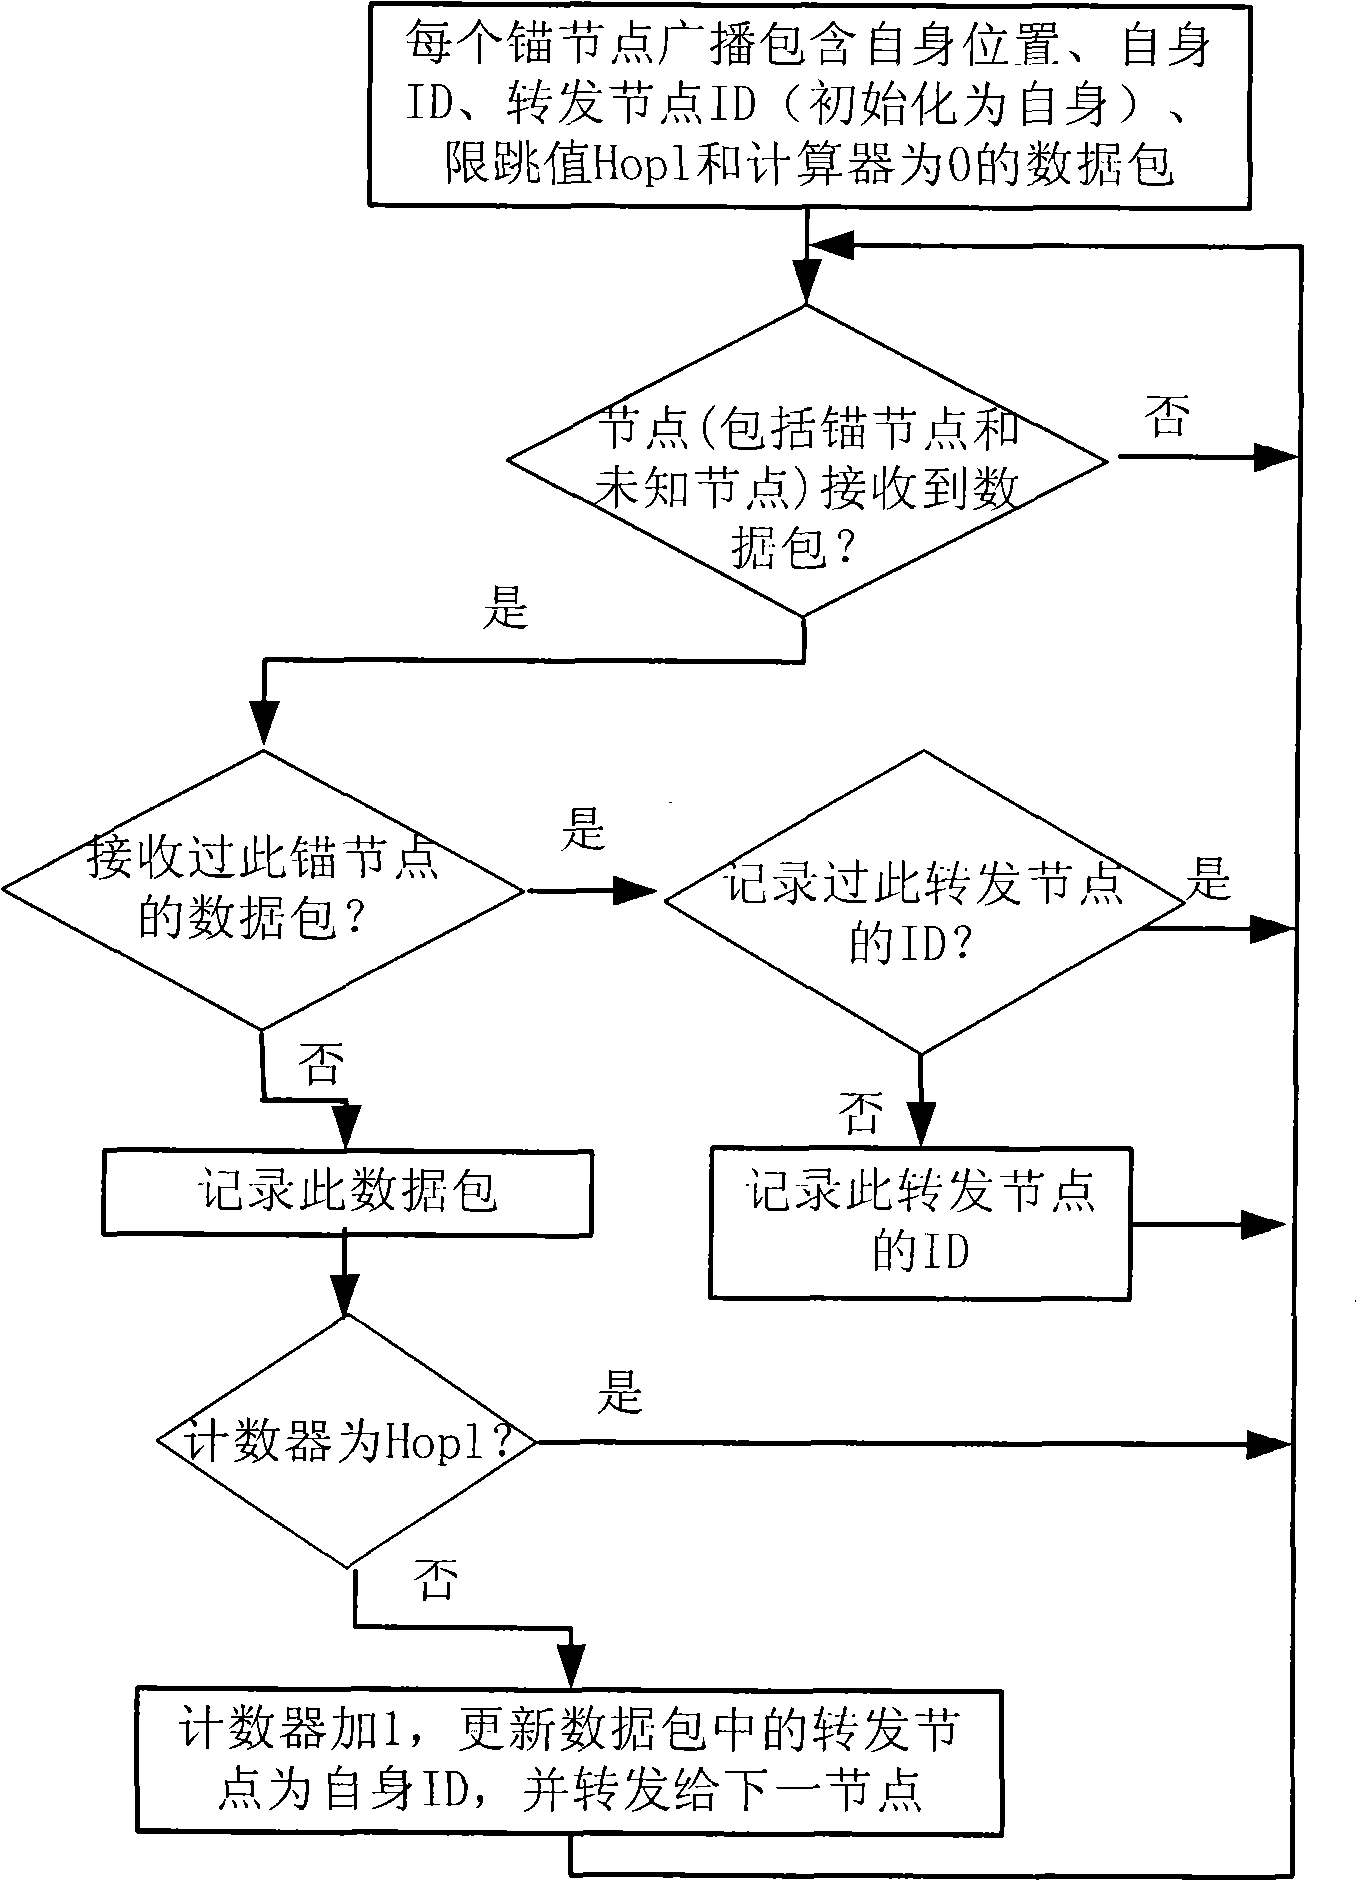 Method for positioning wireless sensor network node without ranging based on connectedness